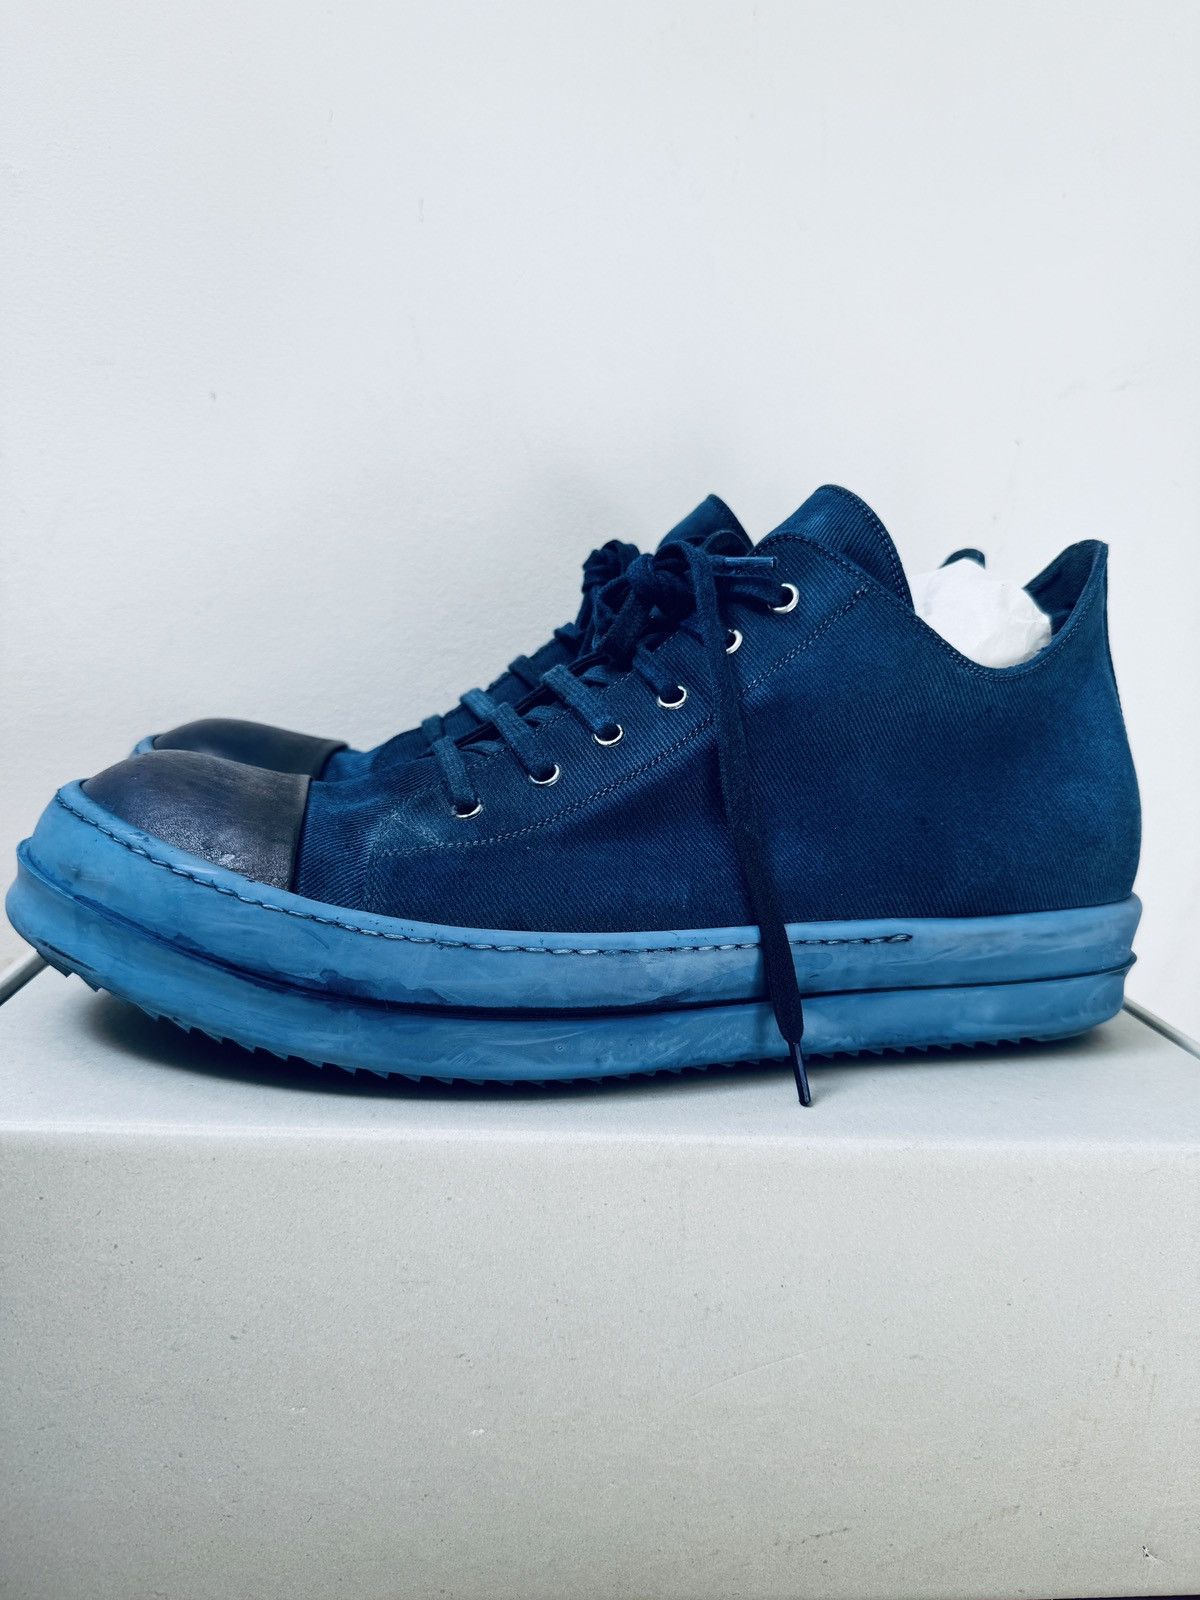 Pre-owned Rick Owens Drkshdw Low Sneaks - Indigo/indico/indico Shoes In Blue